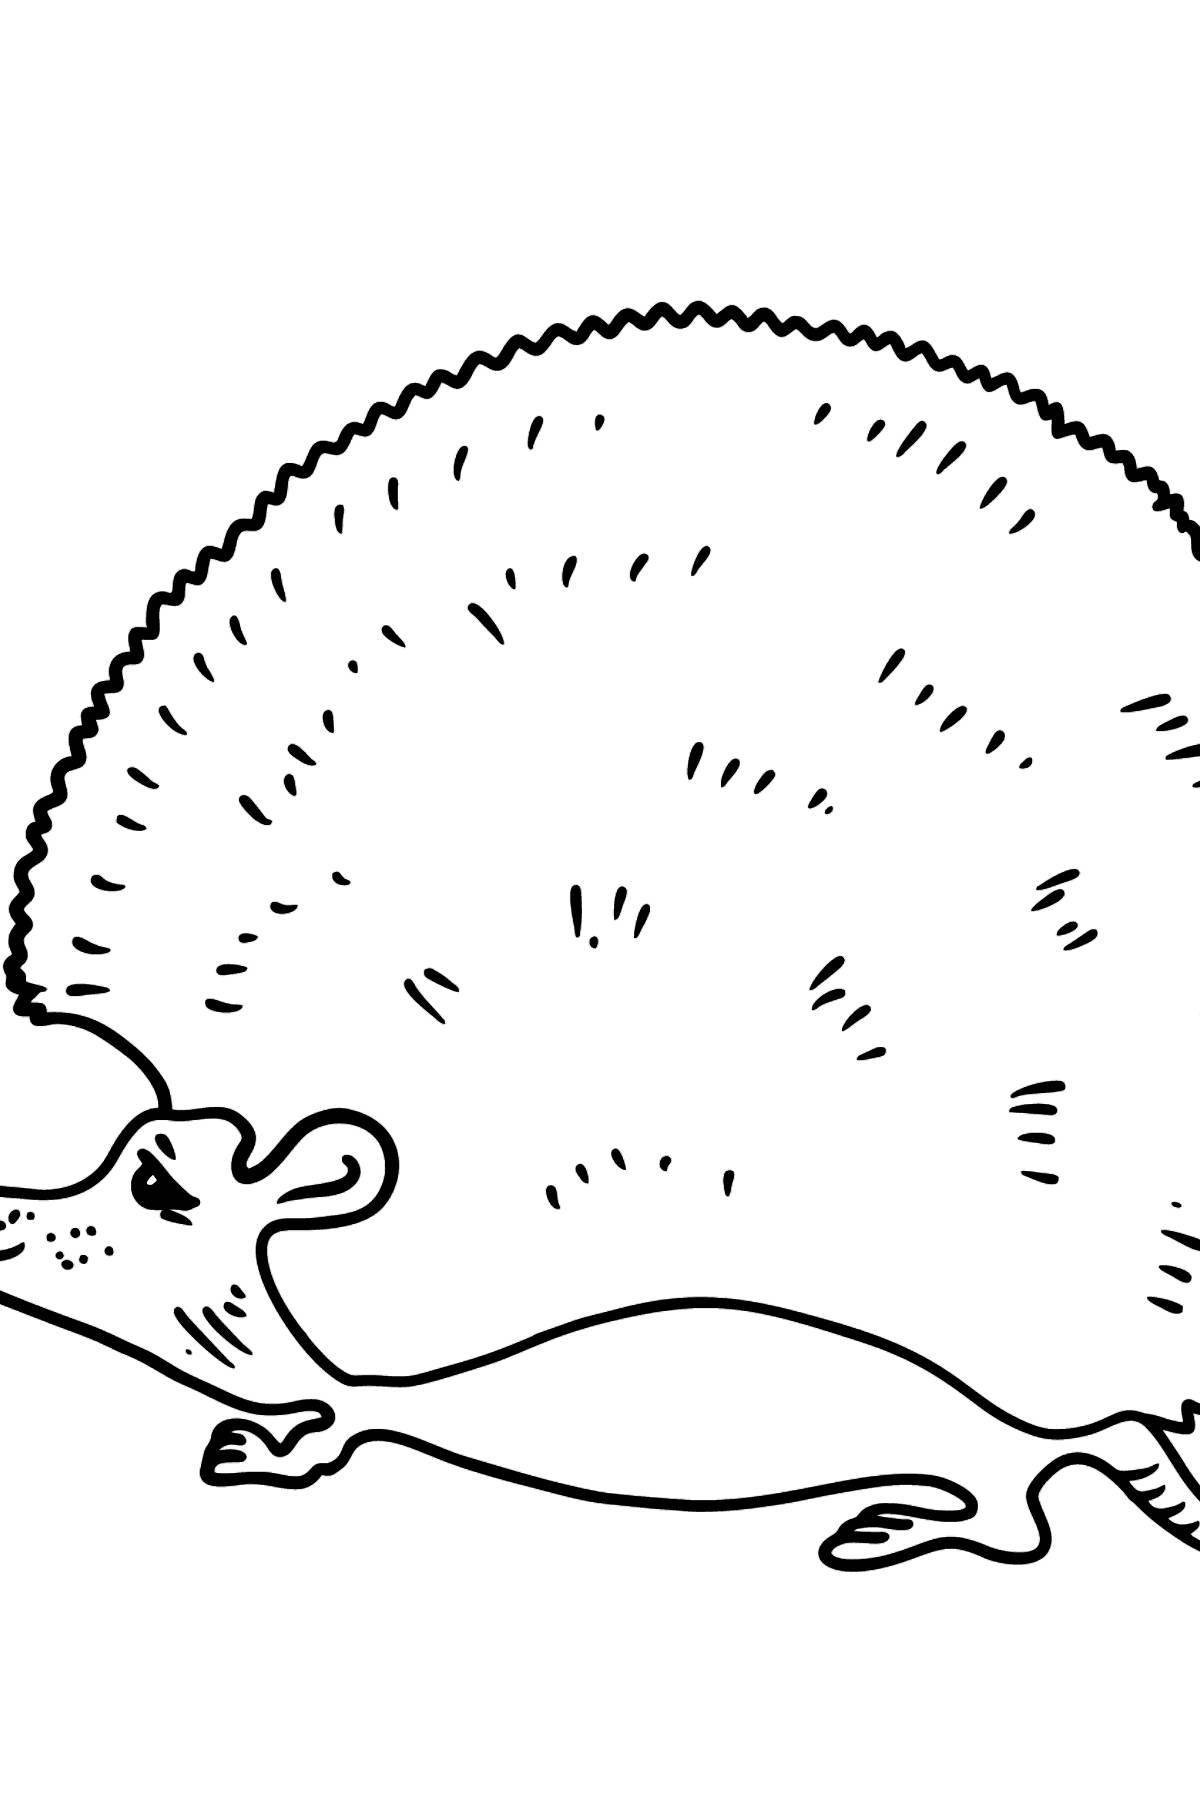 Dazzling coloring book needleless hedgehog for kids